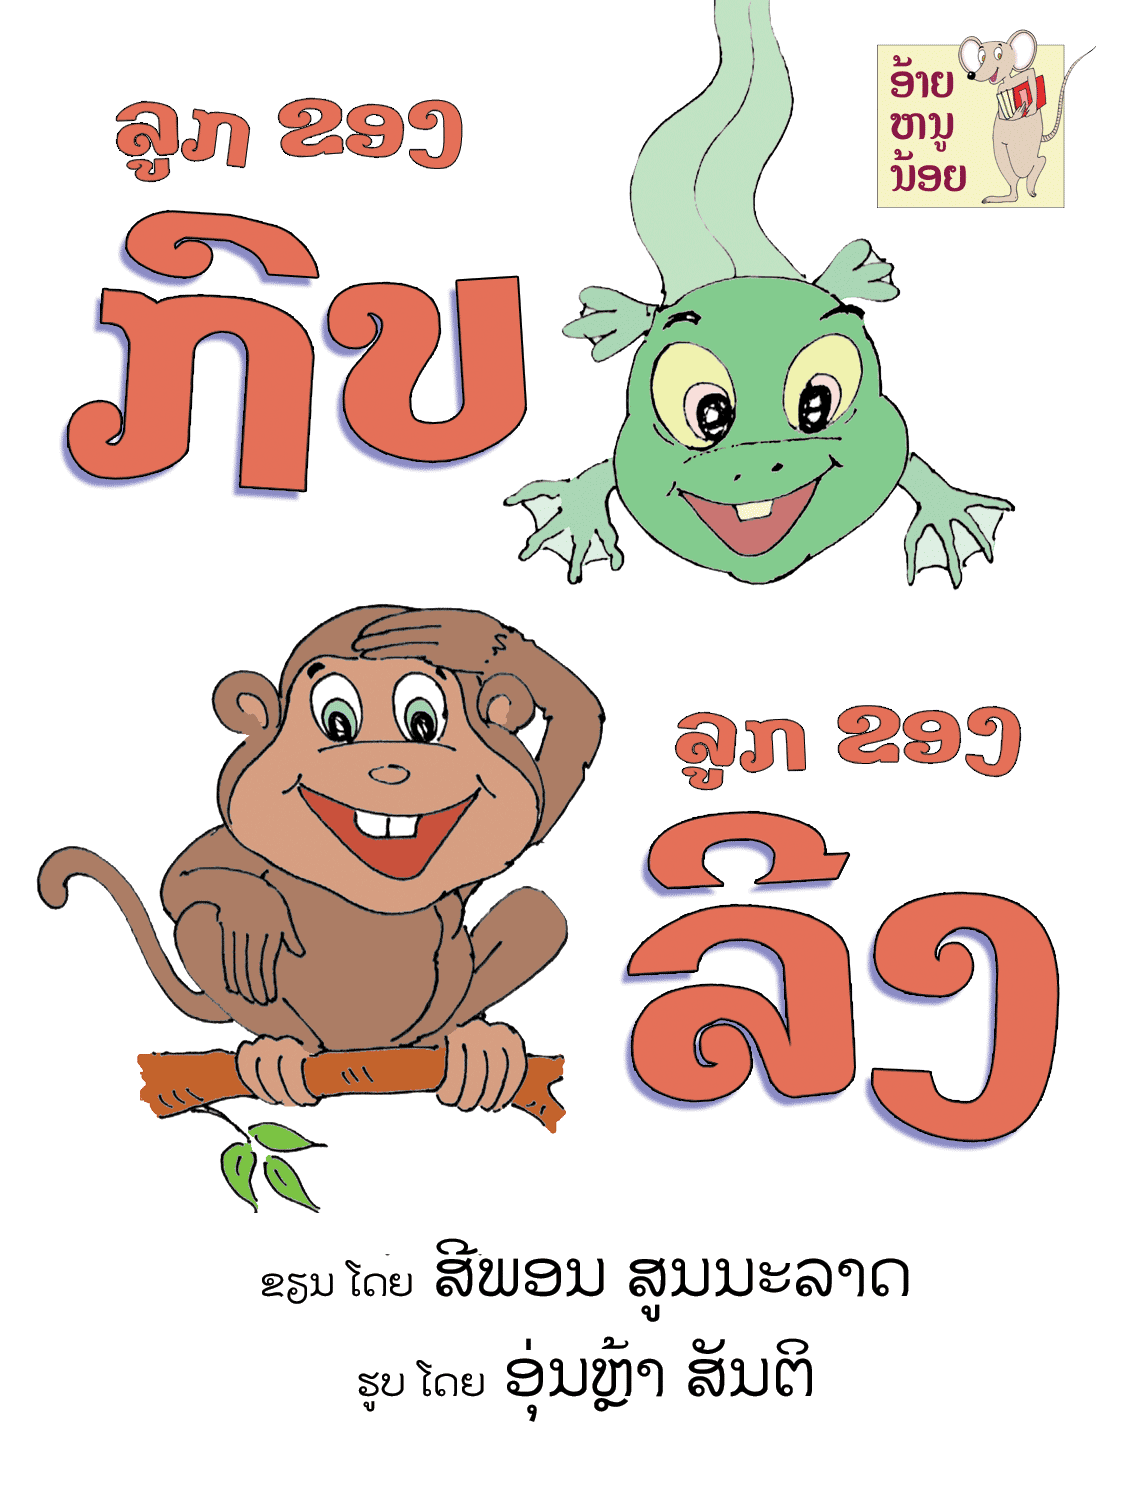 Baby Frog, Baby Monkey large book cover, published in Lao language